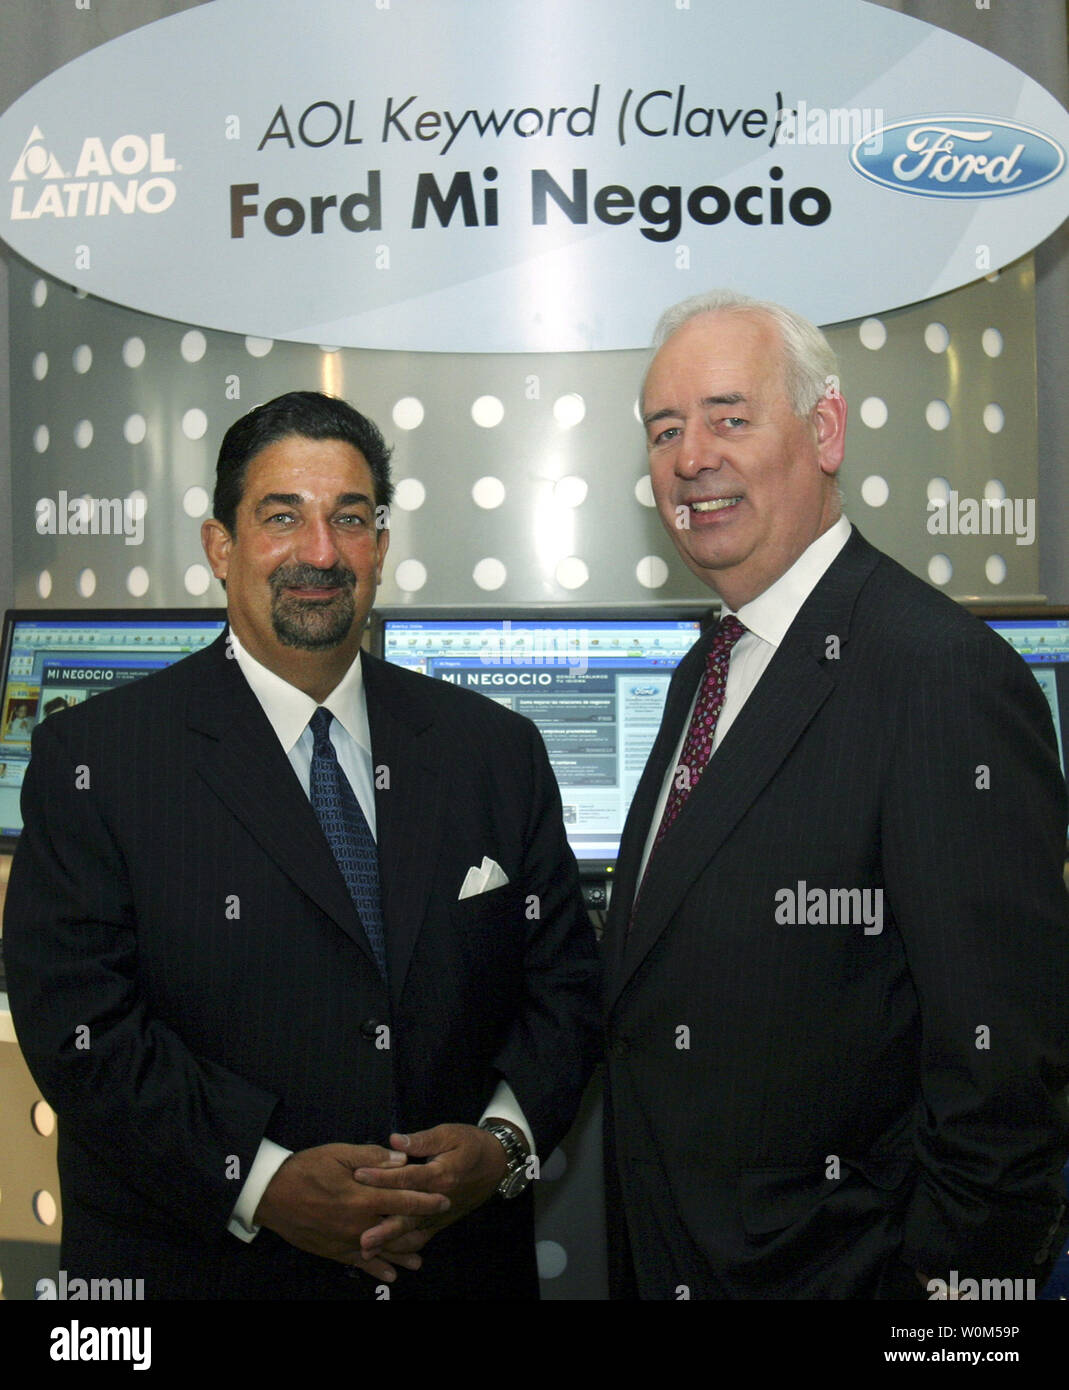 Ted Leonsis, Vice Chairman of America Online, Inc. & President of AOL Core Services (left) and Nick Scheele, President of Ford Motor Company, announce the launch of MI NEGOCIO (“my business”), the first-ever Spanish language online business community to provide Hispanic entrepreneurs with the information, resources and connections needed to start or grow their own business during a press conference on Thursday, April 29, 2004 in New York City.  The site initiated by Ford, will be powered by AOL Latino, the largest Internet service for U.S. Hispanics. (UPI Photo/Anders Krusberg/Medialink) Stock Photo